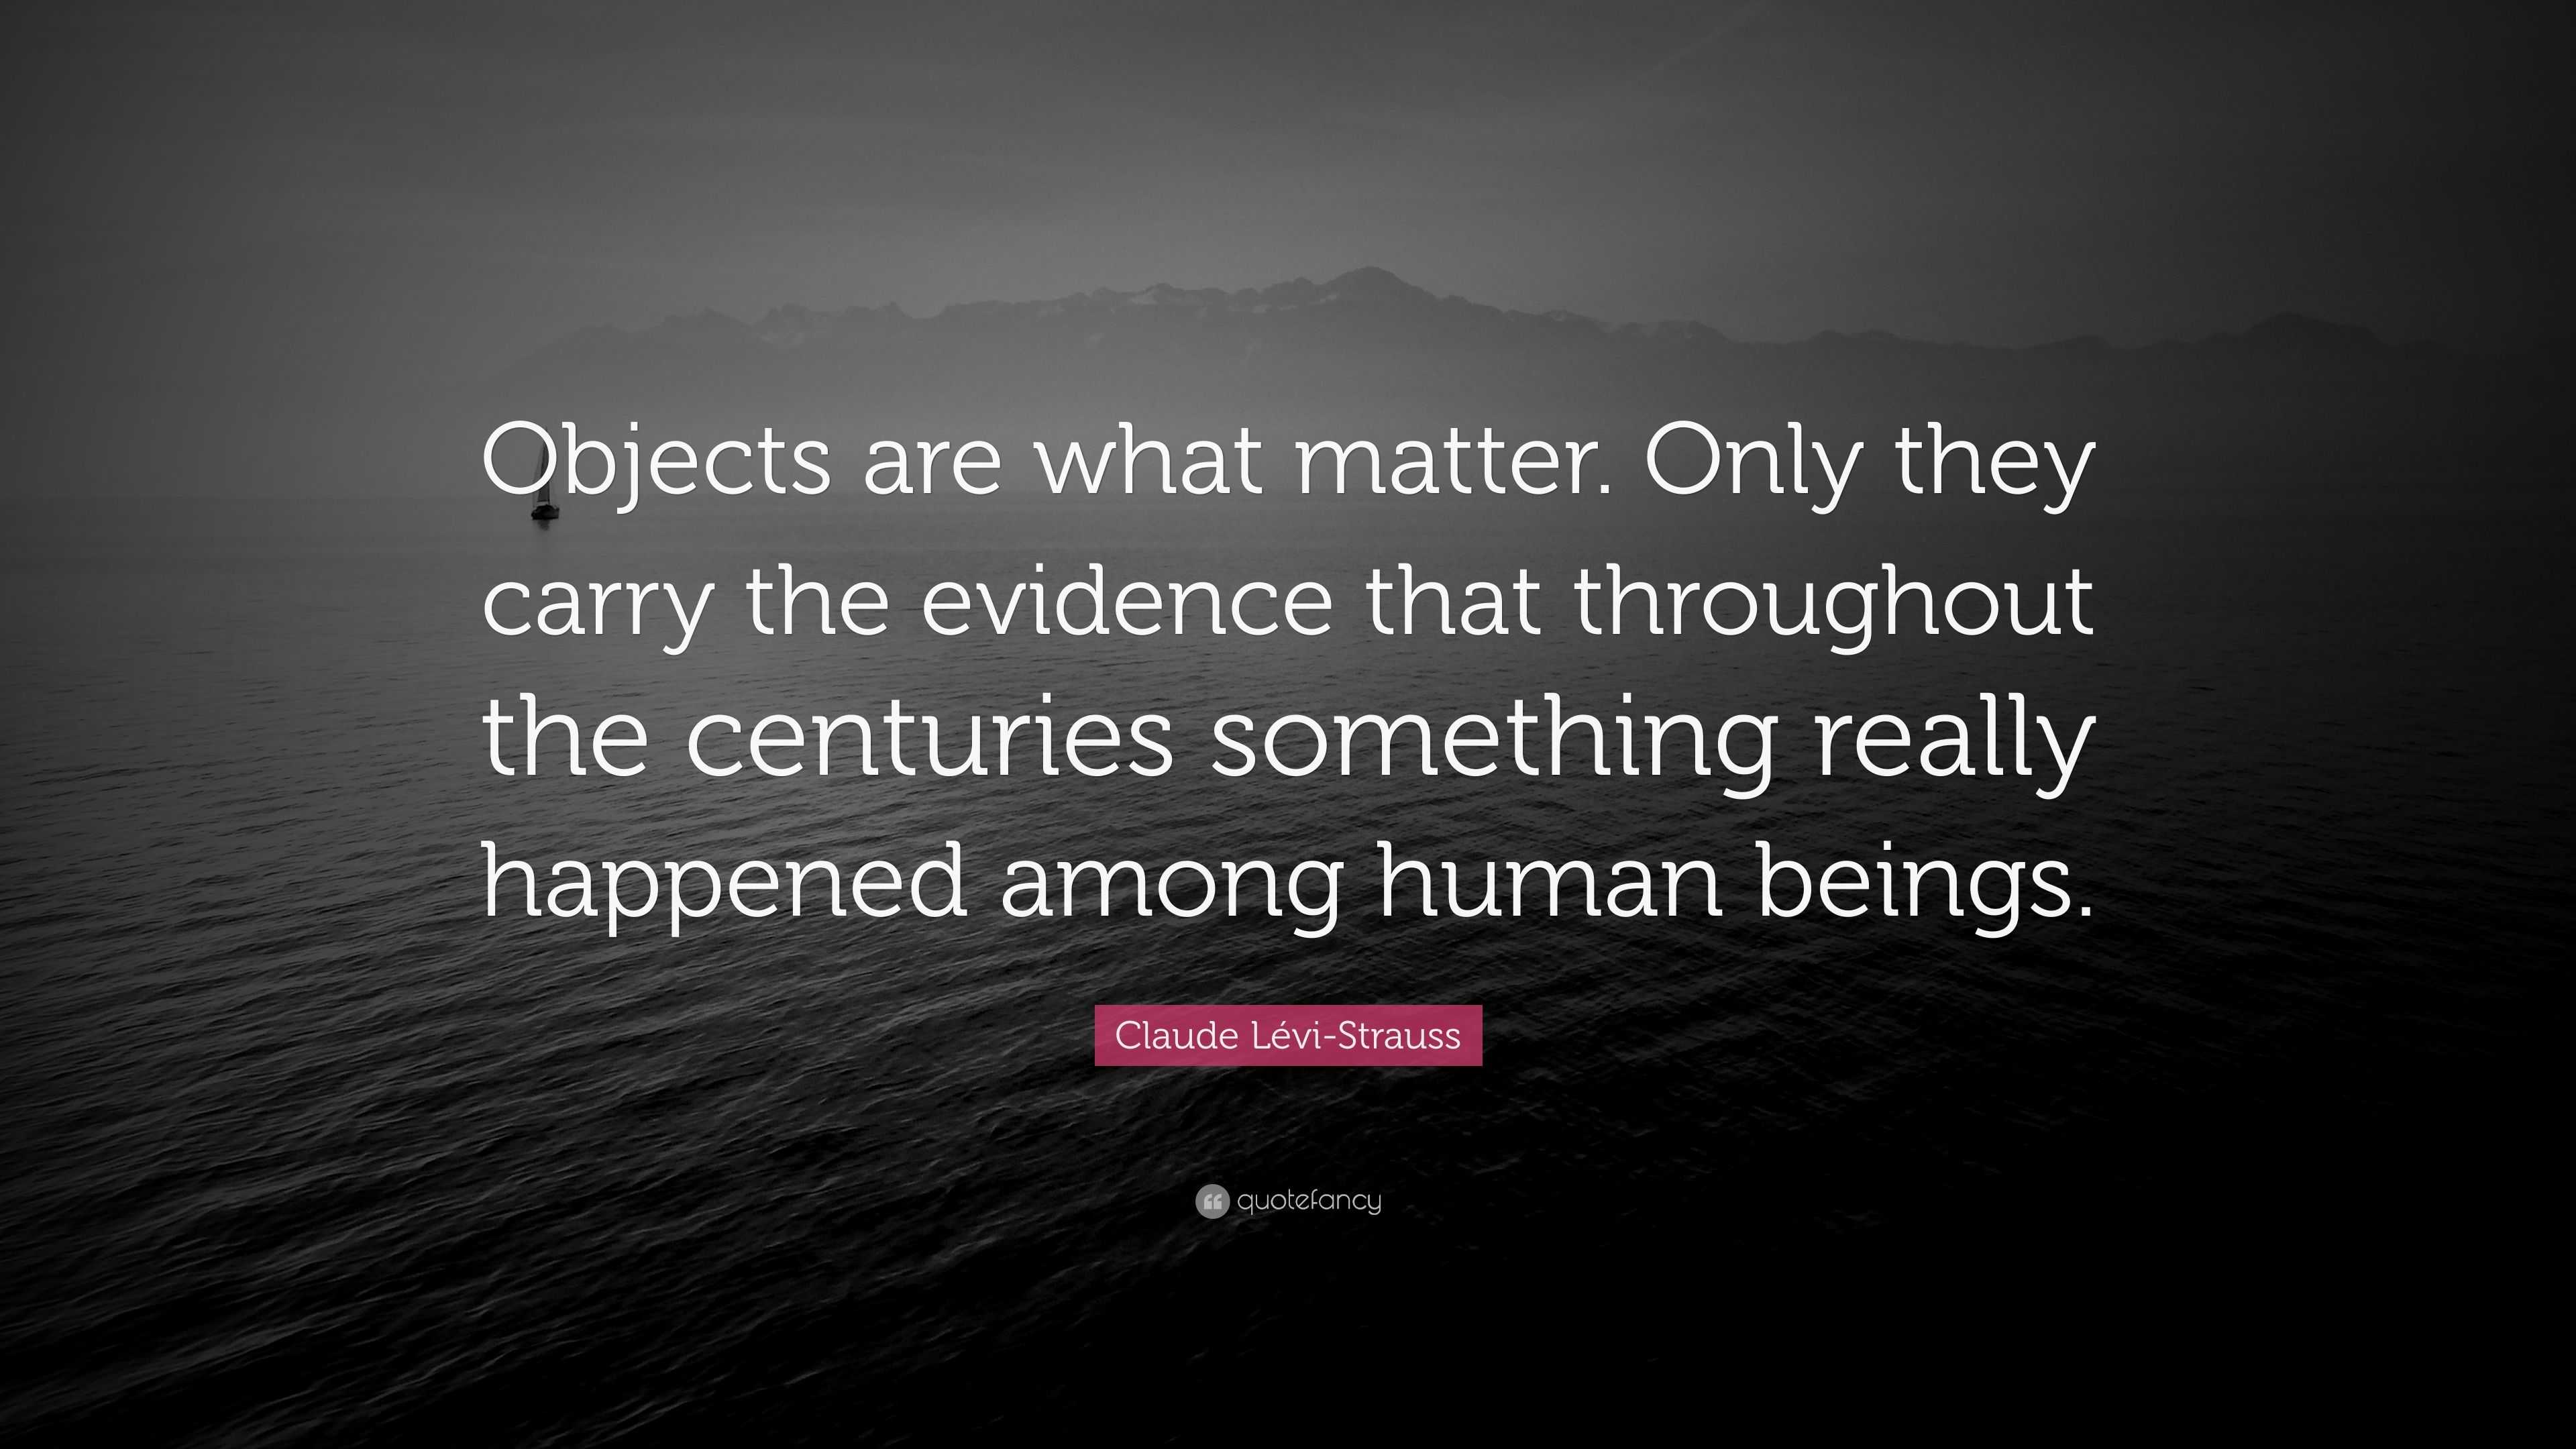 Claude Lévi-Strauss Quote: “Objects are what matter. Only they carry